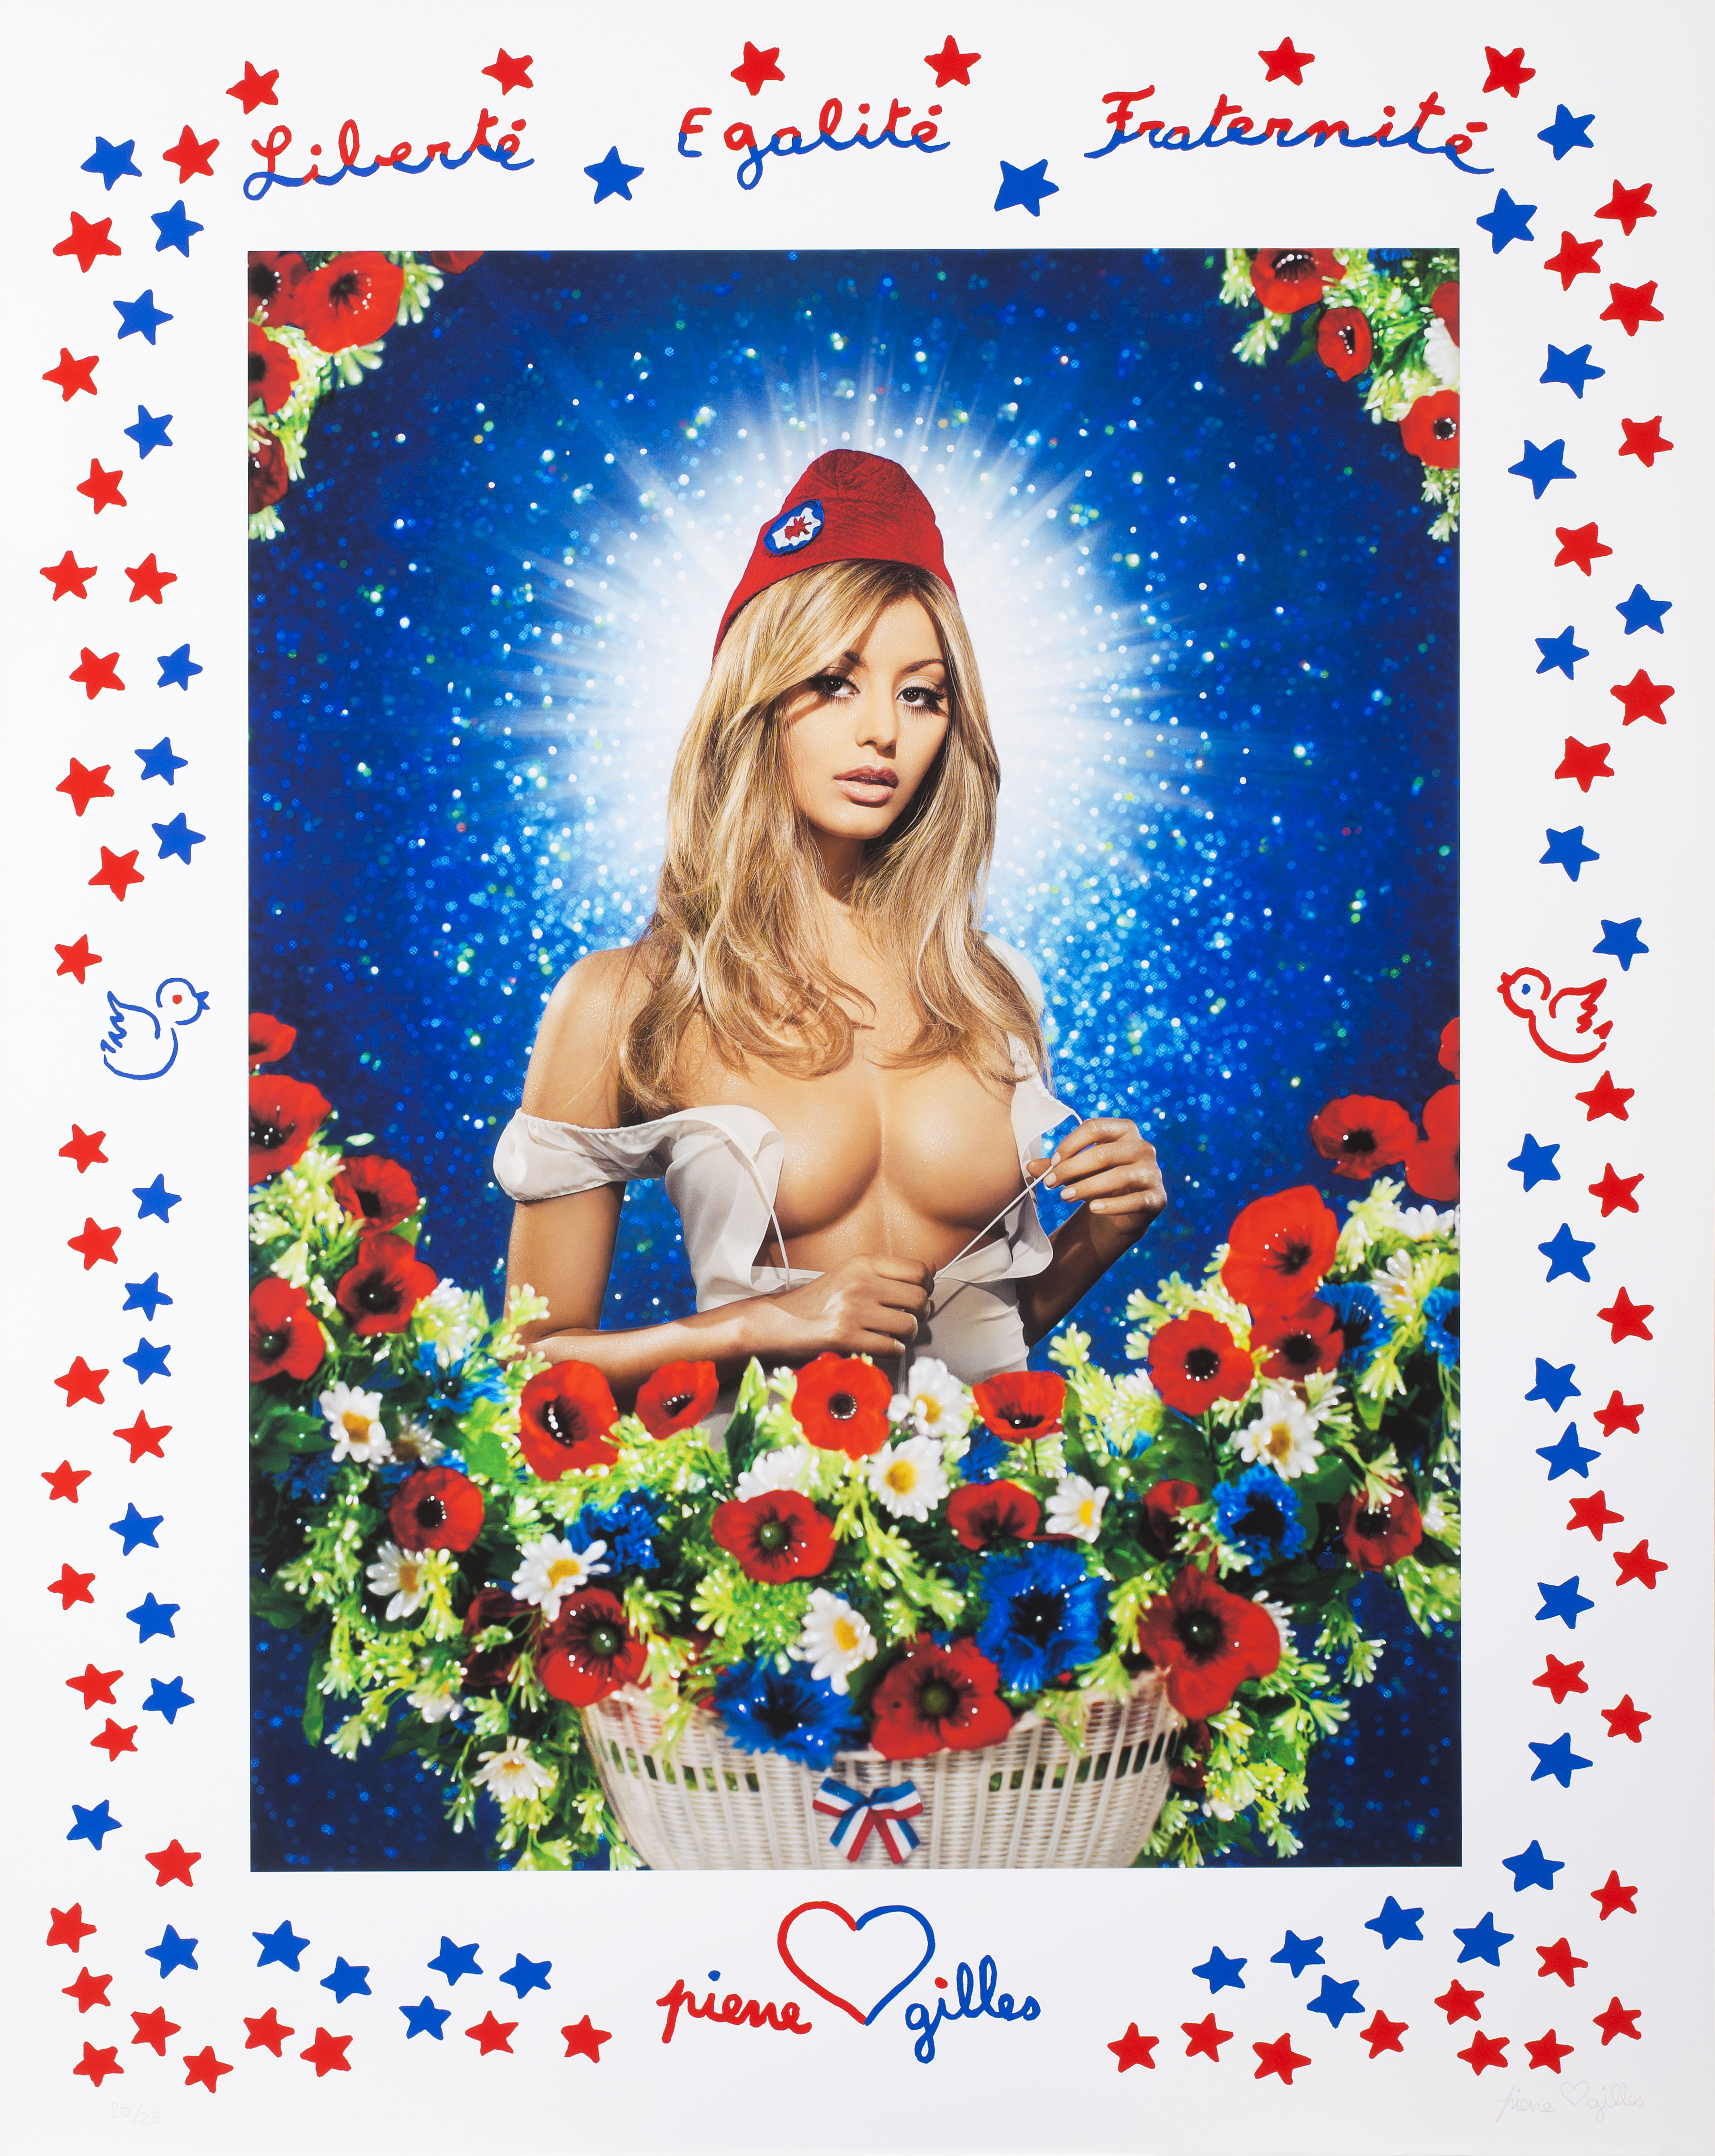 Pierre Commoy & Gilles Blanchard dits PIERRE & GILLES - Zahia / Marianne, 2015